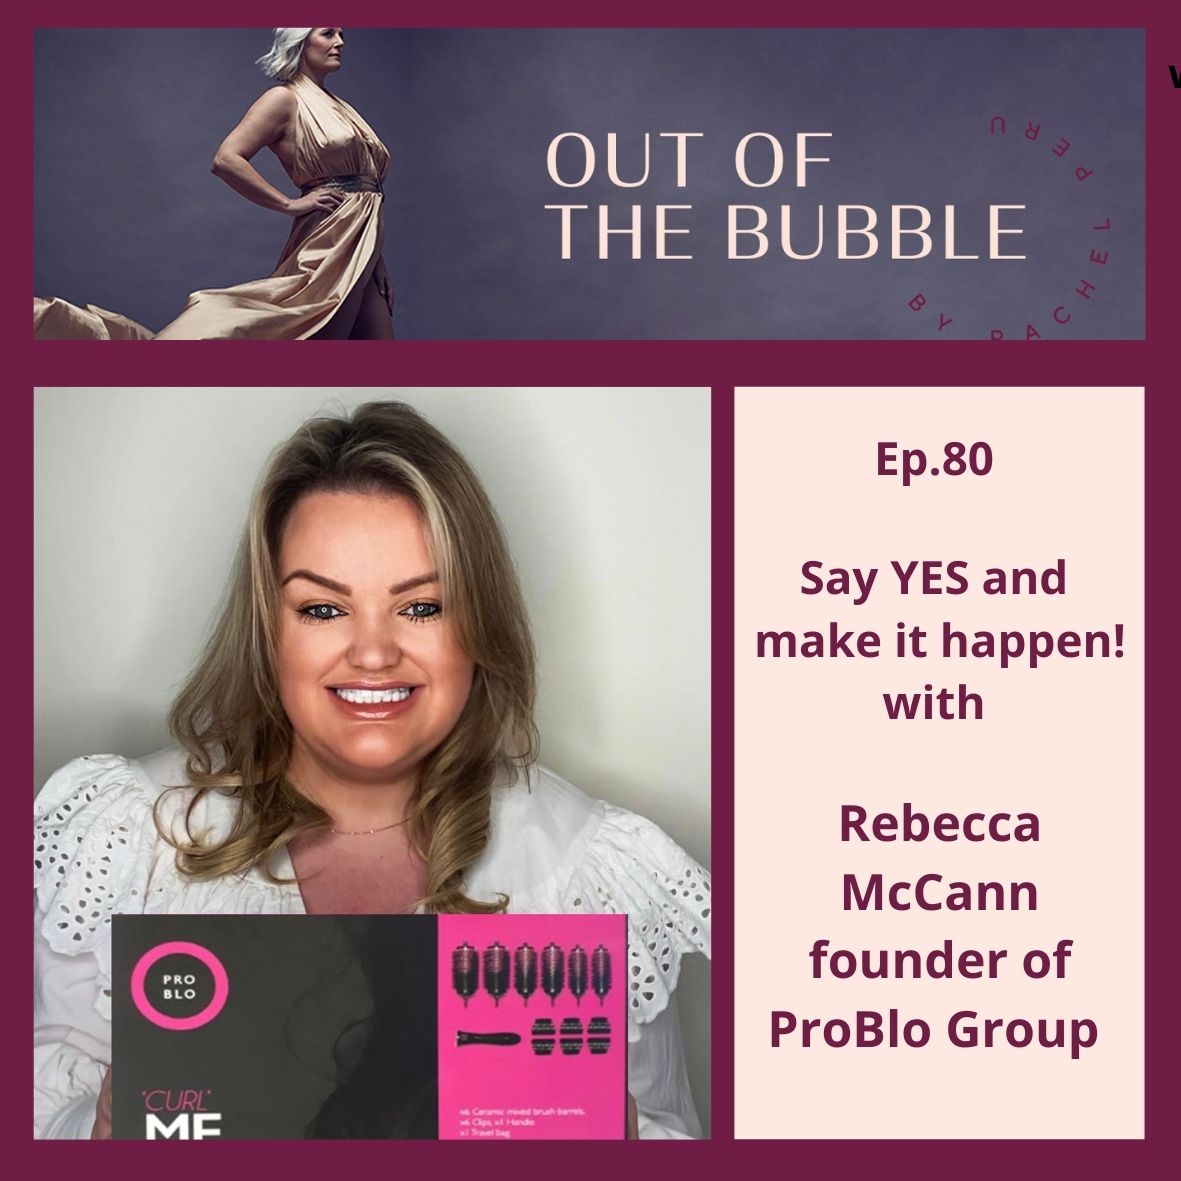 Ep.80 Liberte Free to Be with Rebecca McCann, founder of Pro Blo Group.